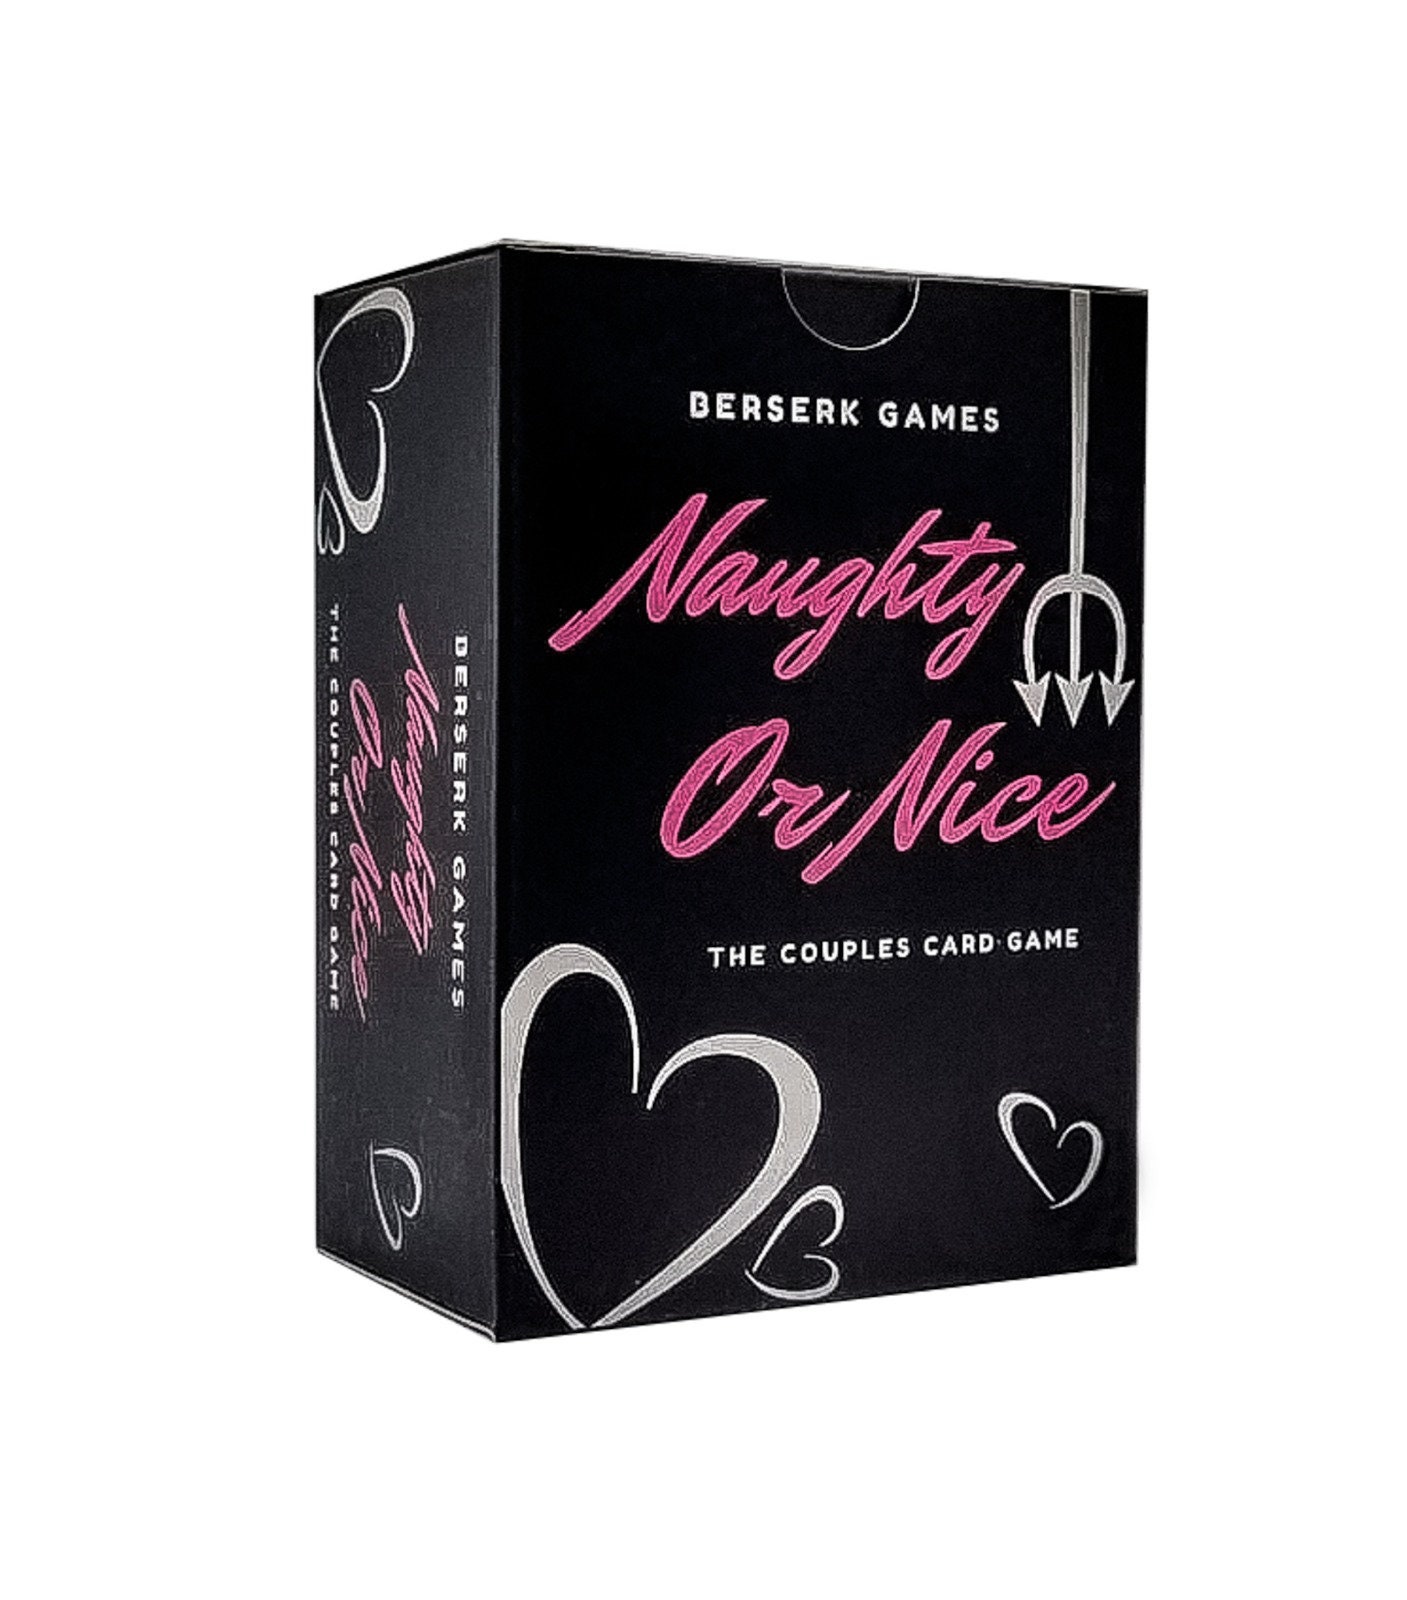  Gears Out Naughty Soap – Naughty Gifts for Men Bad